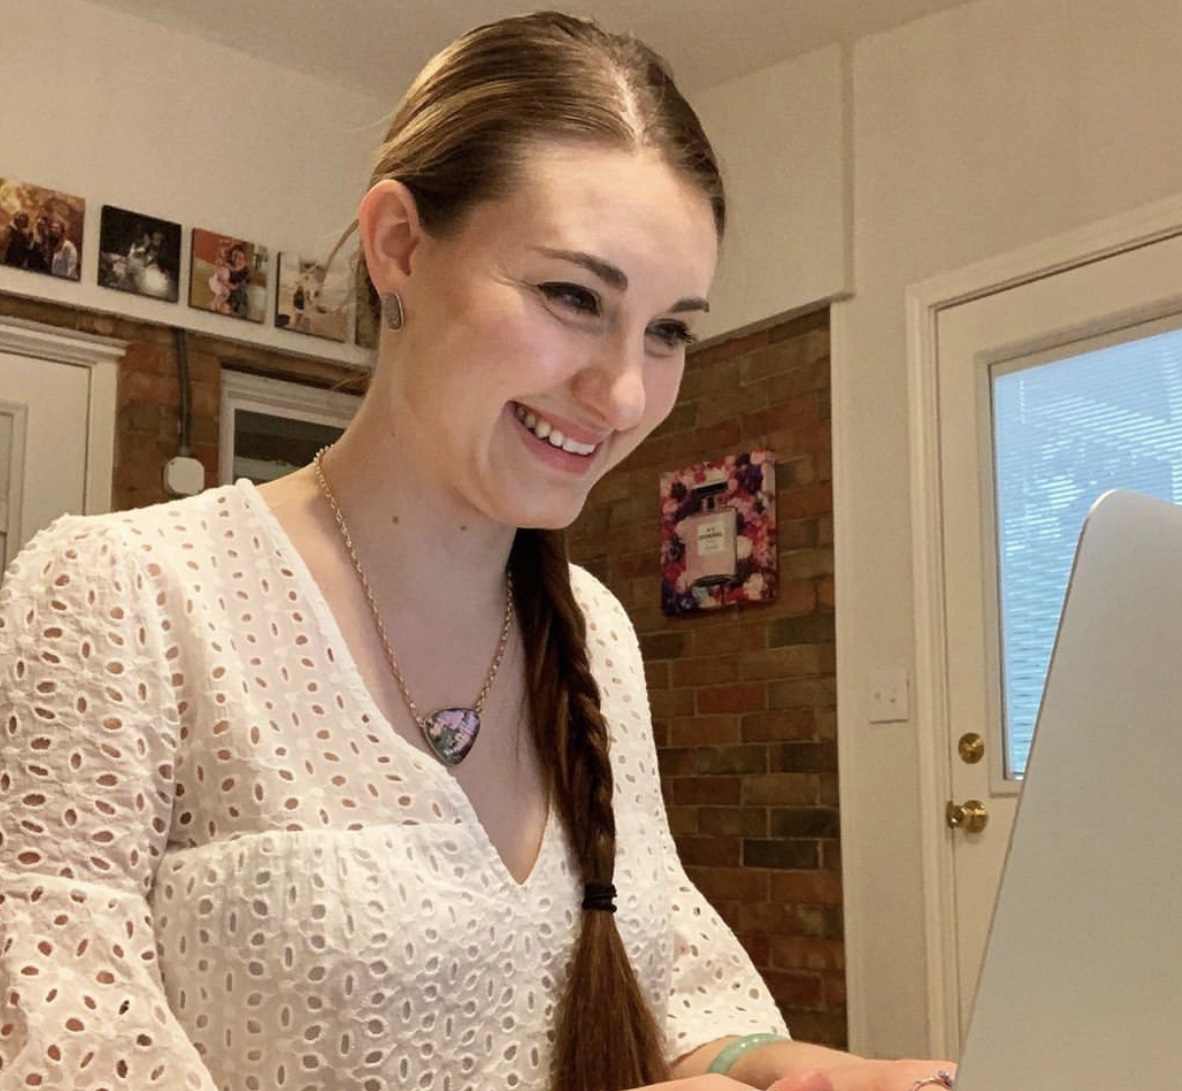 image of a young woman looking at her computer with an excited expression